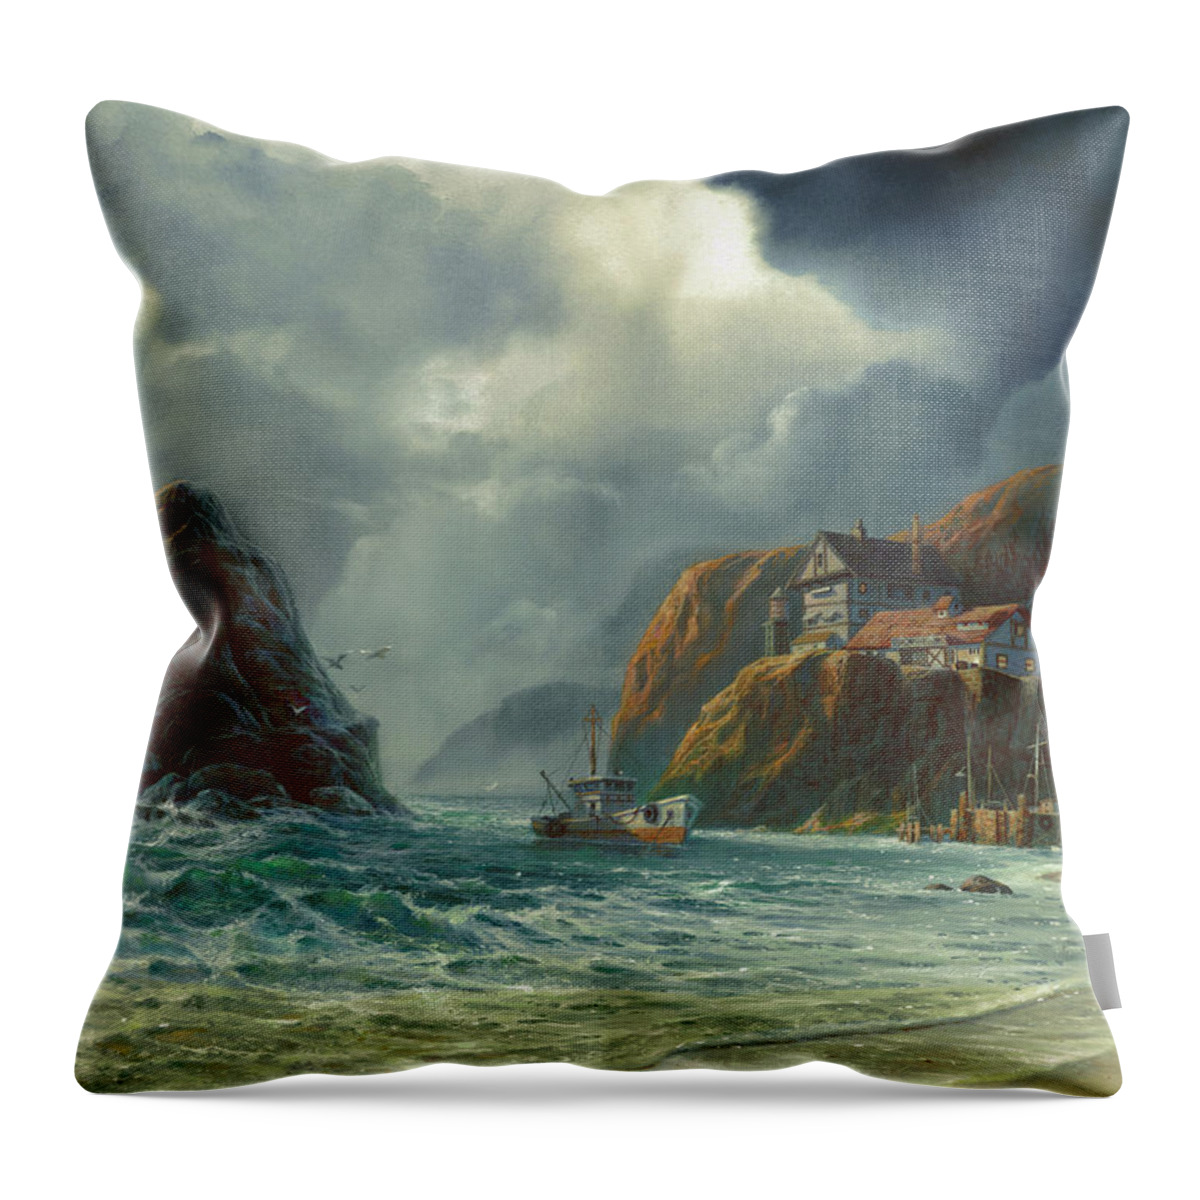 Michael Humphries Throw Pillow featuring the painting Sanctuary by Michael Humphries